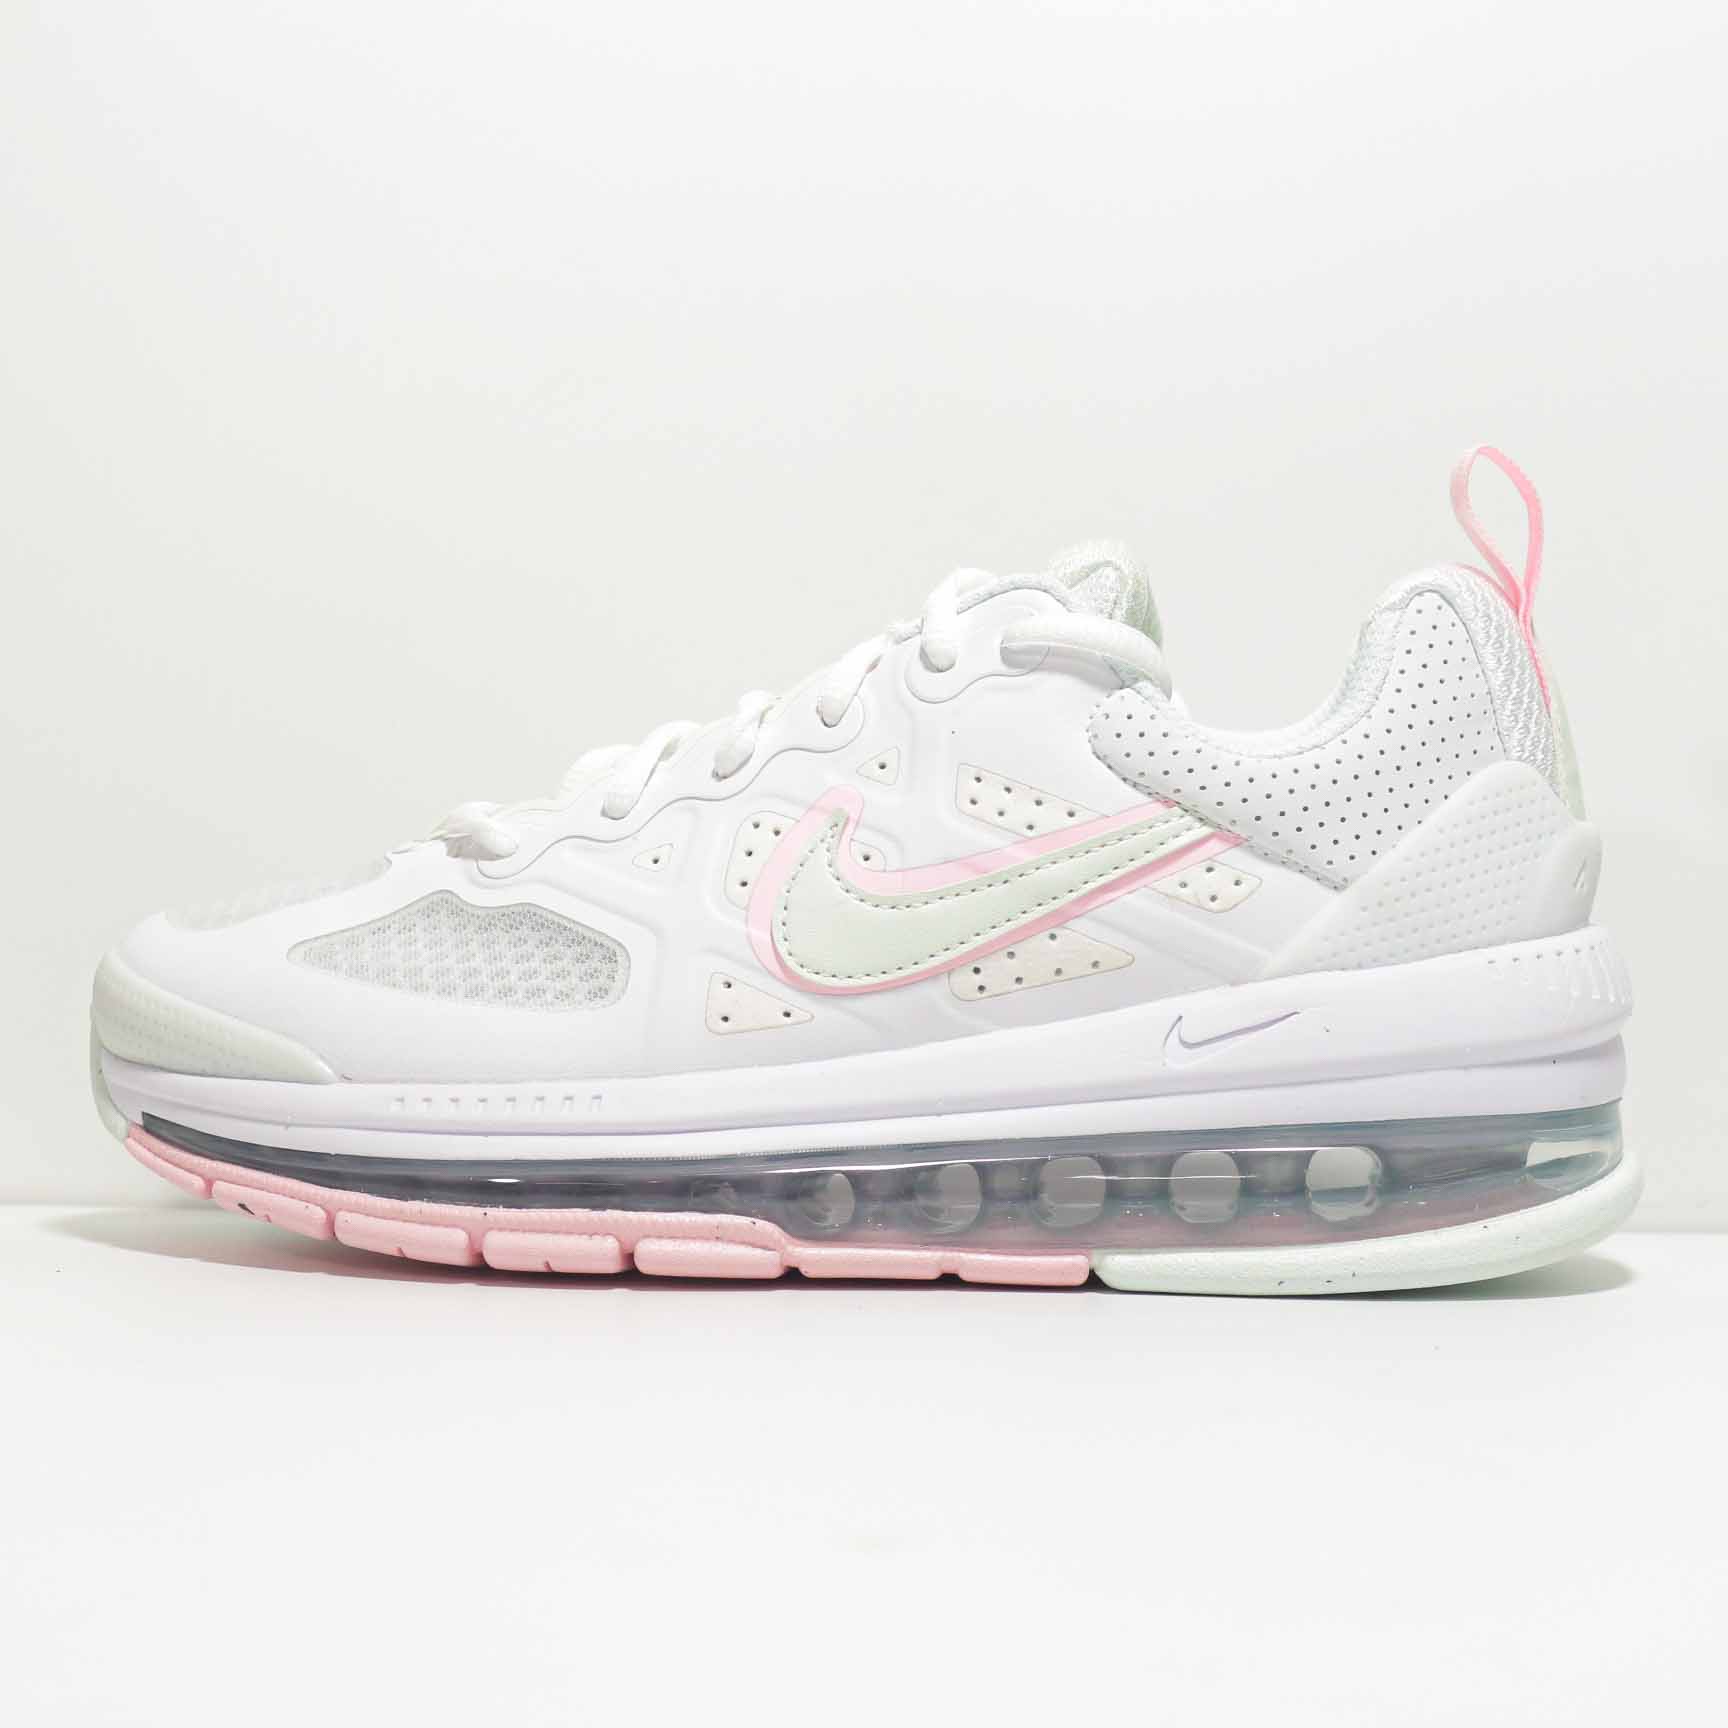 2021 Women Nike Air Max Genome White Pink Shoes